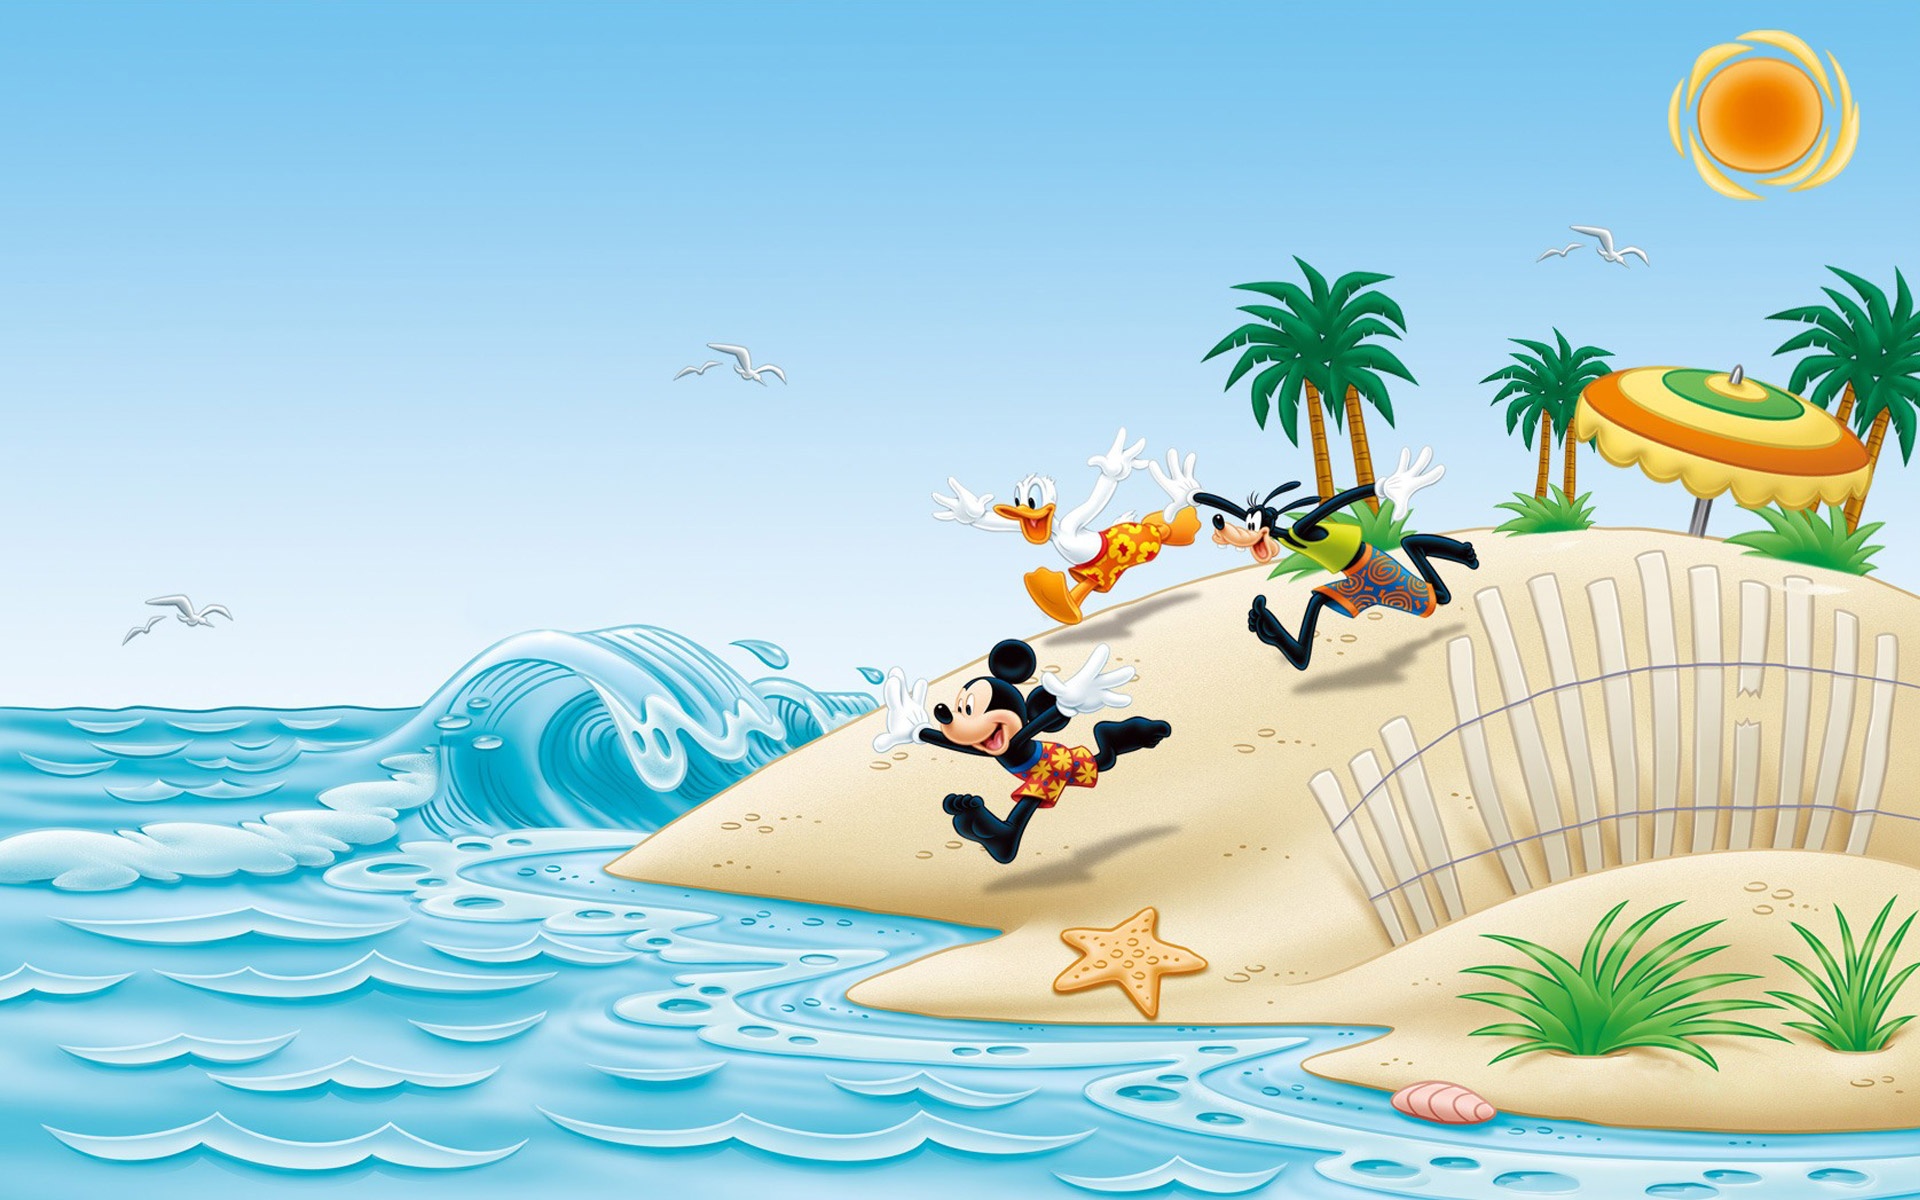 Mickey Mouse Donald Duck Goofy Holiday At The Beach Image